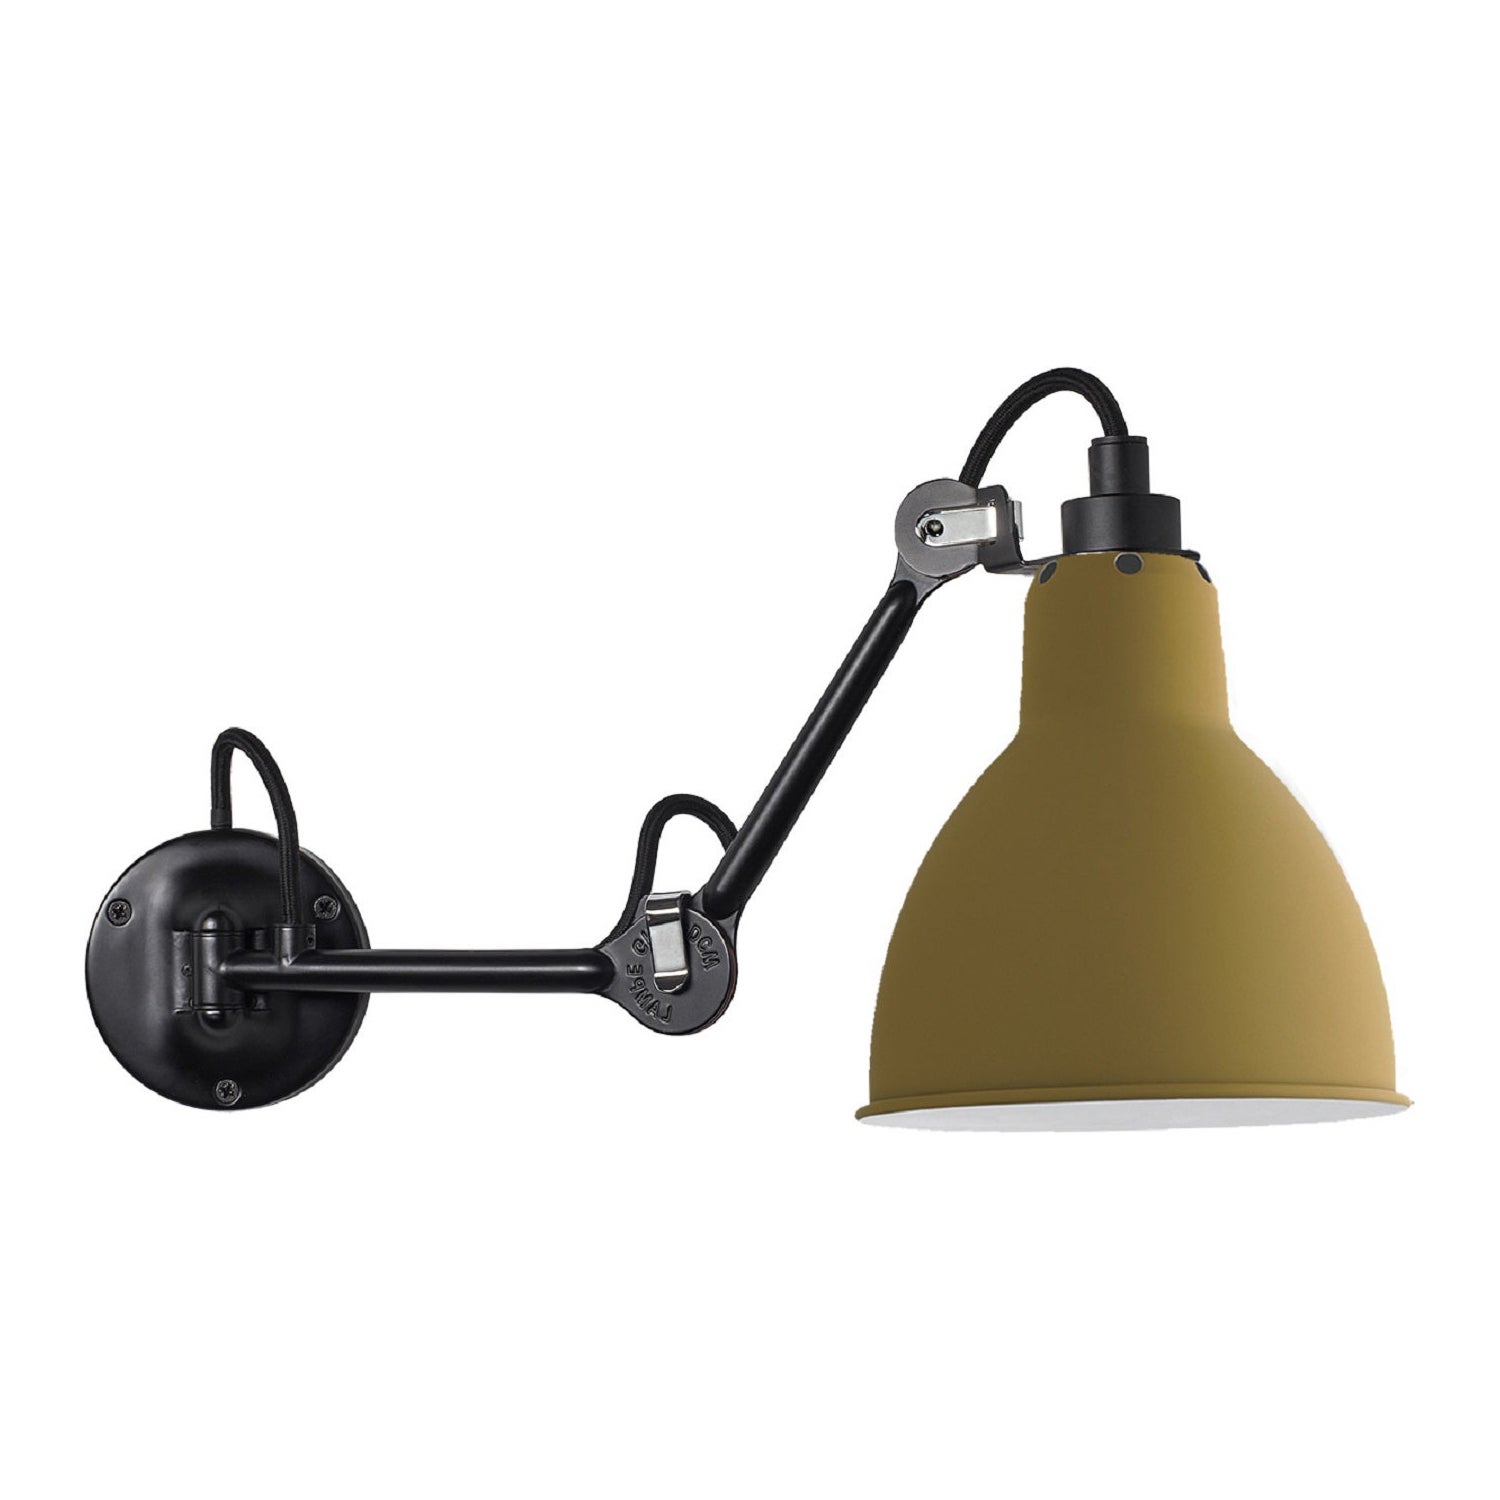 DCW Editions La Lampe Gras N°204 Wall Lamp in Black Steel Arm and Yellow Shade For Sale